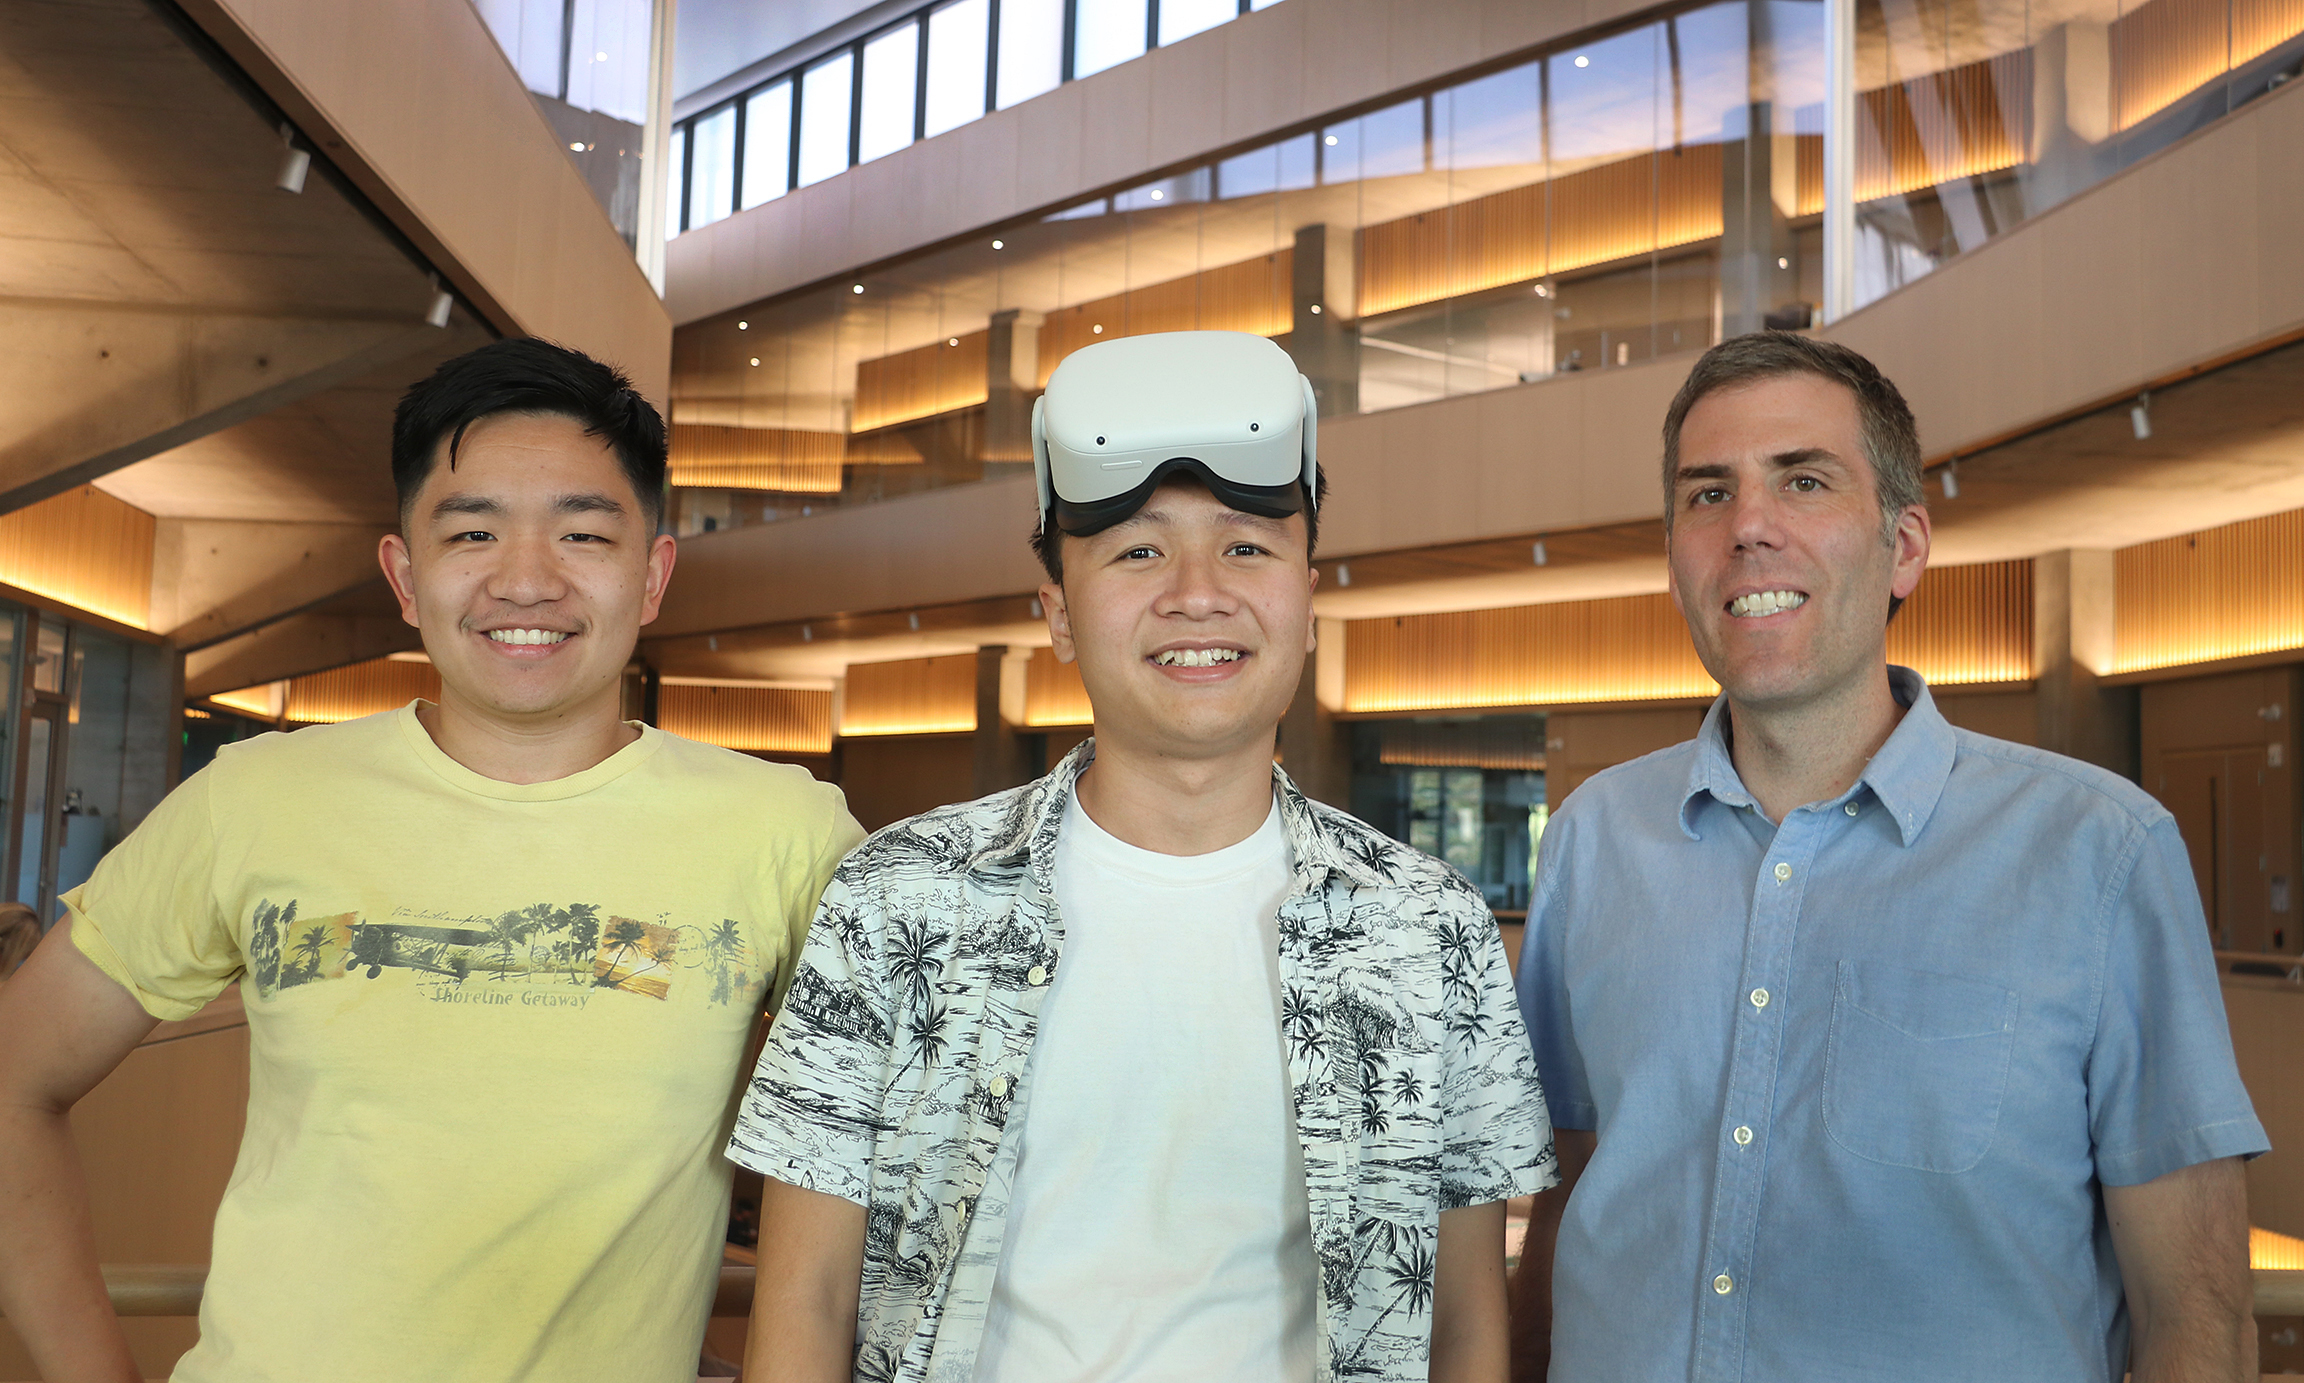 Professor Ventura poses with two students who are working with him on virtual reality projects